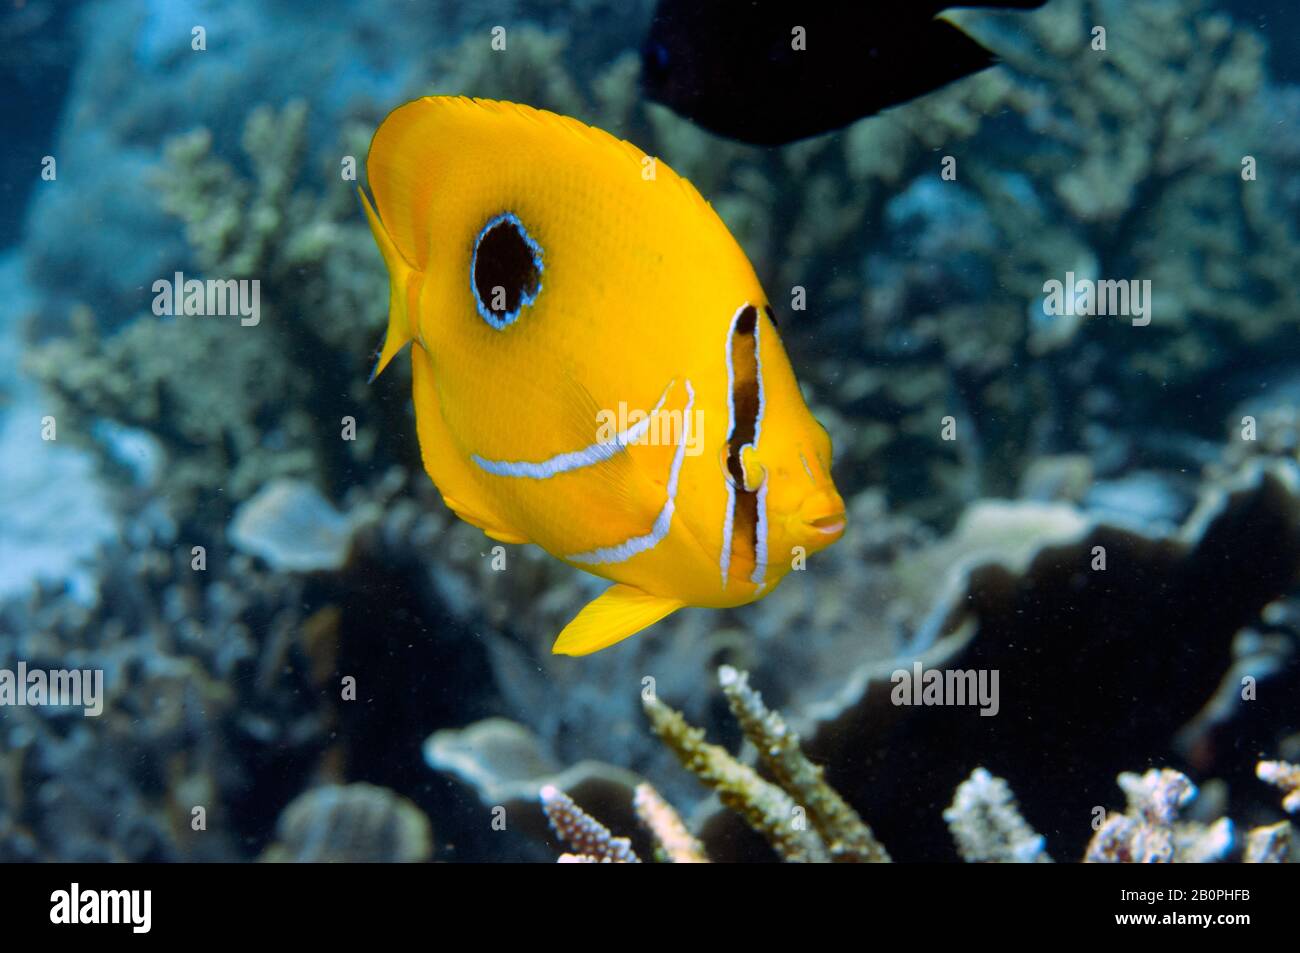 Eclipse or bluelashed butterflyfish, Chaetodon bennetti, Komodo National Park, Indonesia Stock Photo